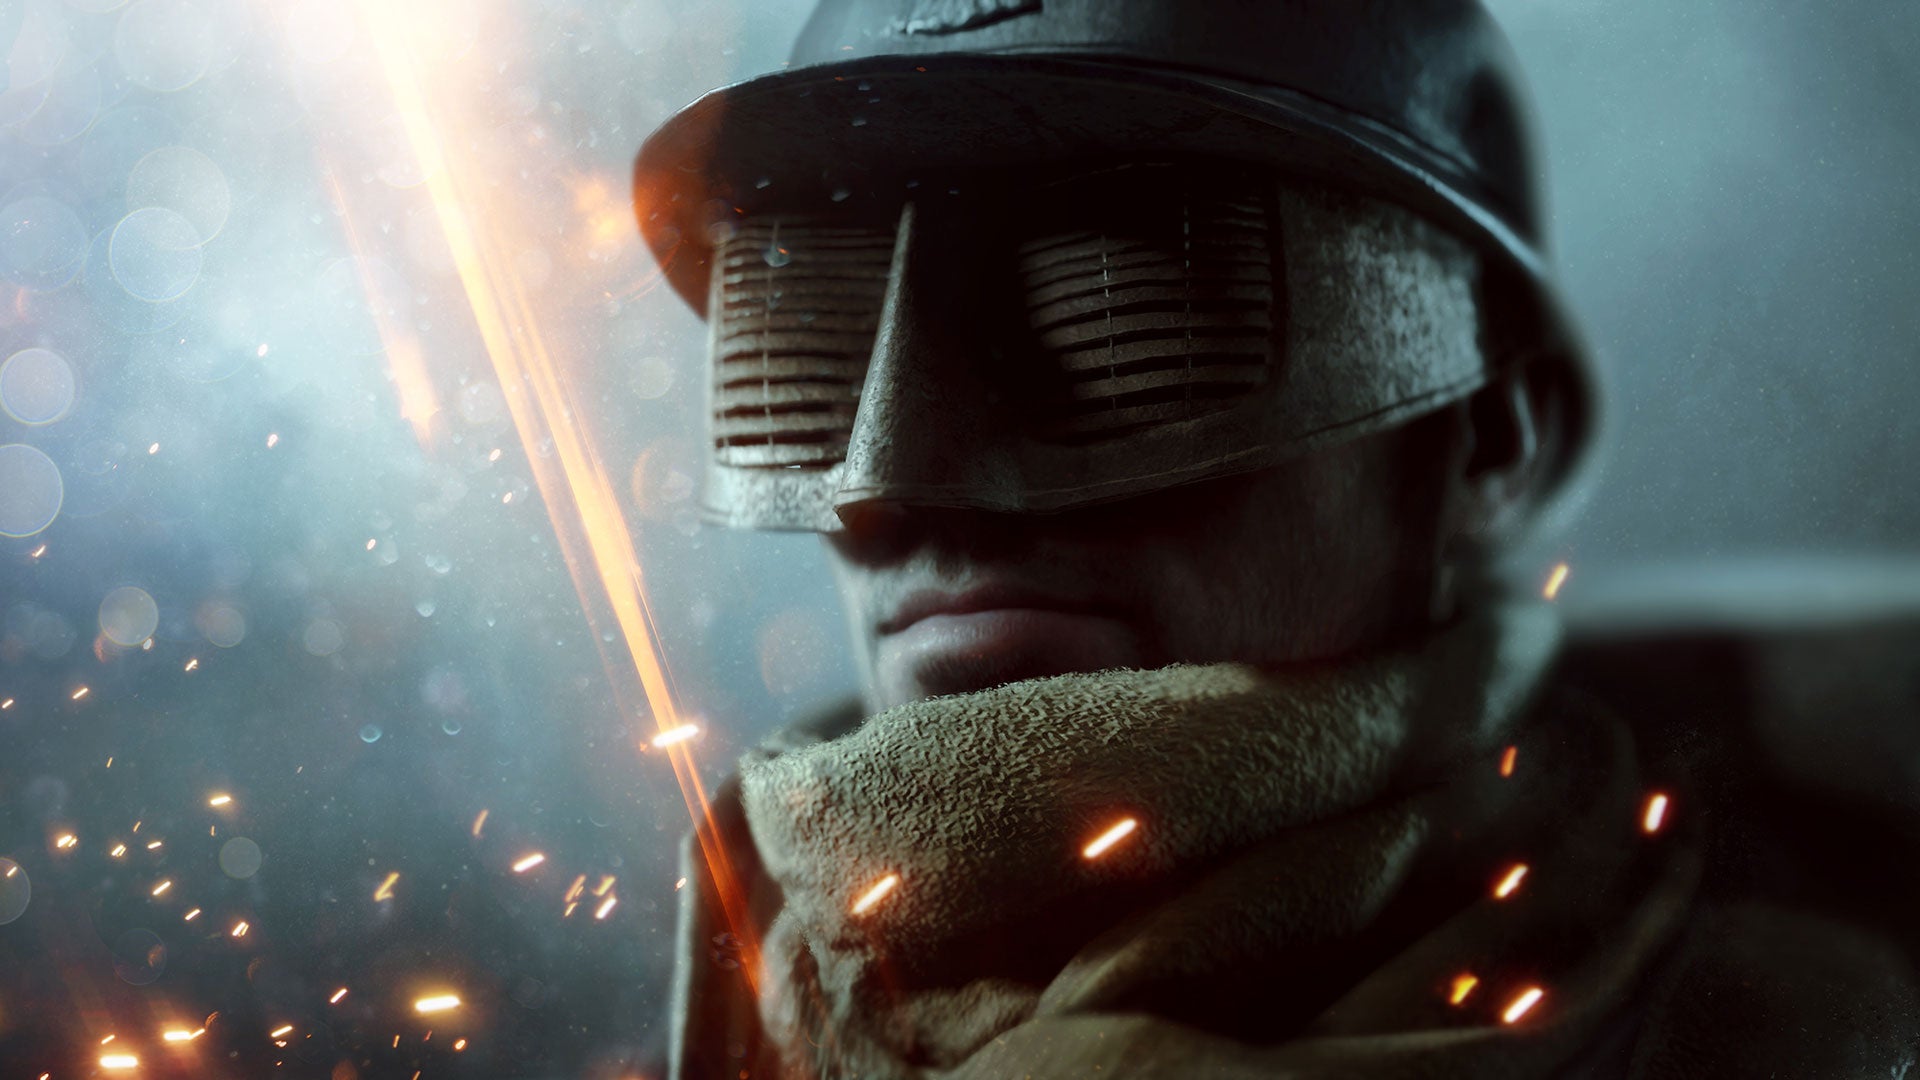 Image for Battlefield 1 is free on Amazon Prime Gaming now, and Battlefield 5 is next